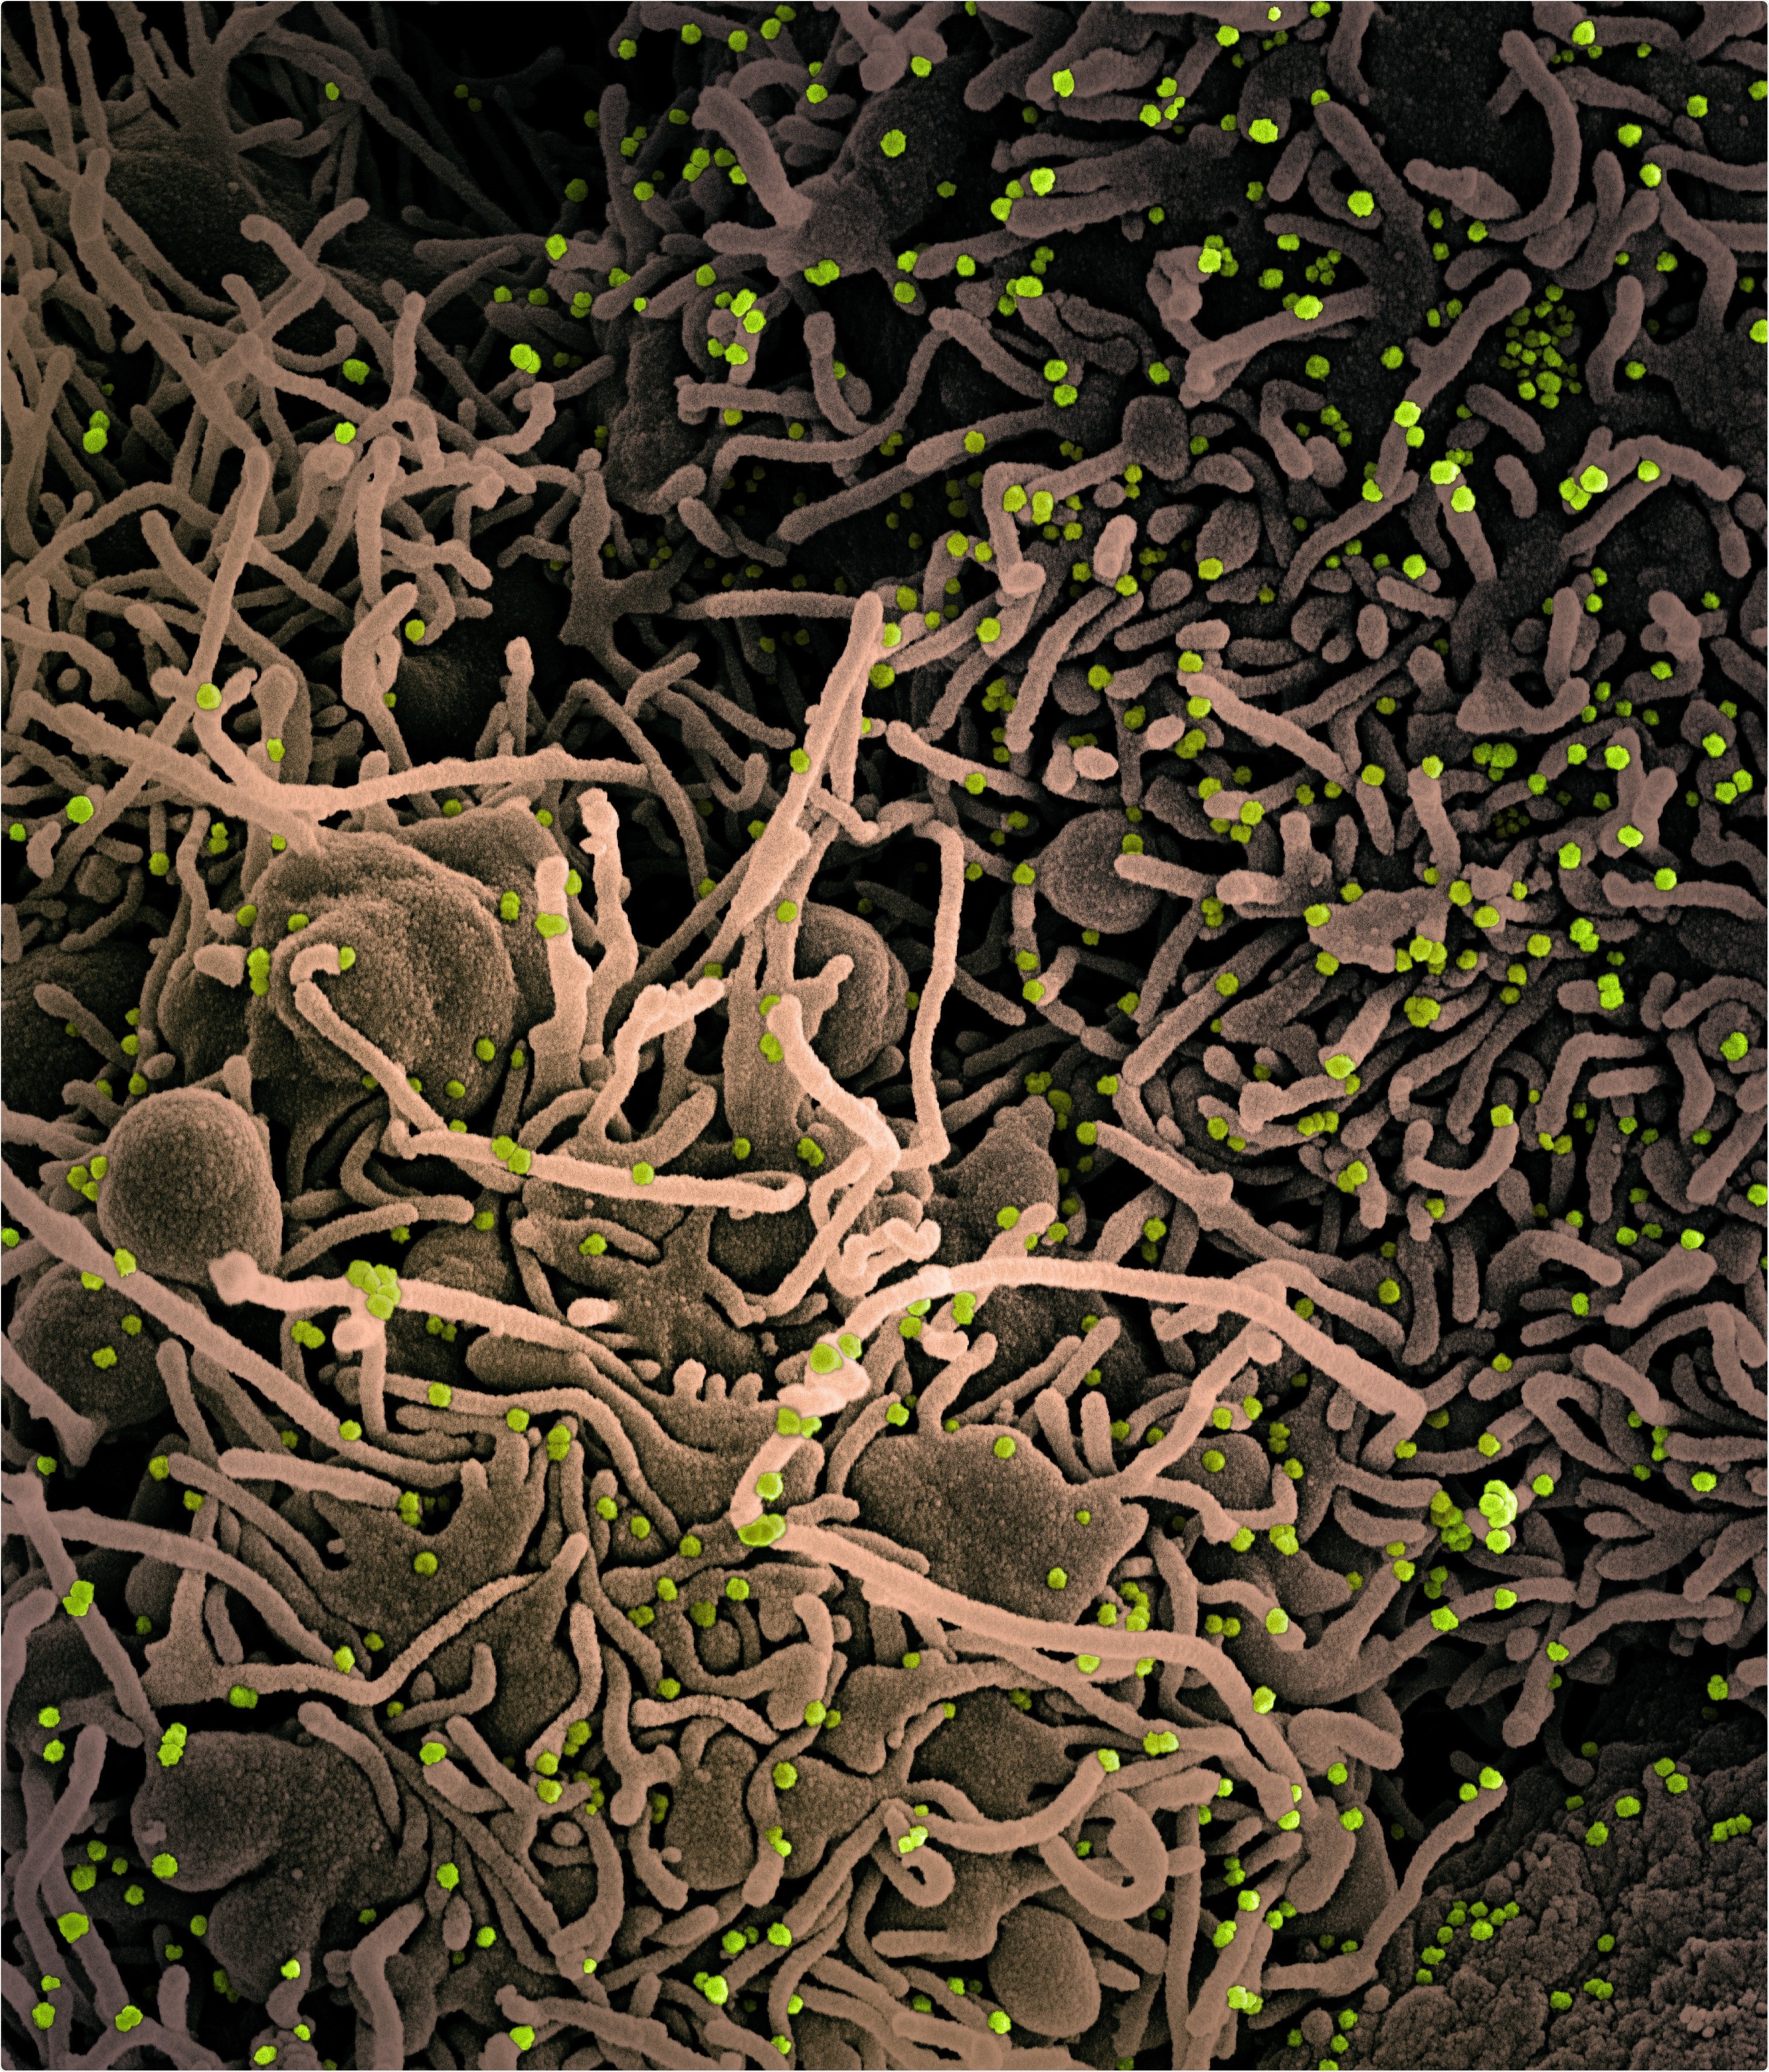 NIAIDFollow Novel Coronavirus SARS-CoV-2 Colorized scanning electron micrograph of a VERO E6 cell (tan) exhibiting elongated cell projections and signs of apoptosis, after infection with SARS-COV-2 virus particles (green), which were isolated from a patient sample. Image captured at the NIAID Integrated Research Facility (IRF) in Fort Detrick, Maryland. Credit: NIAID